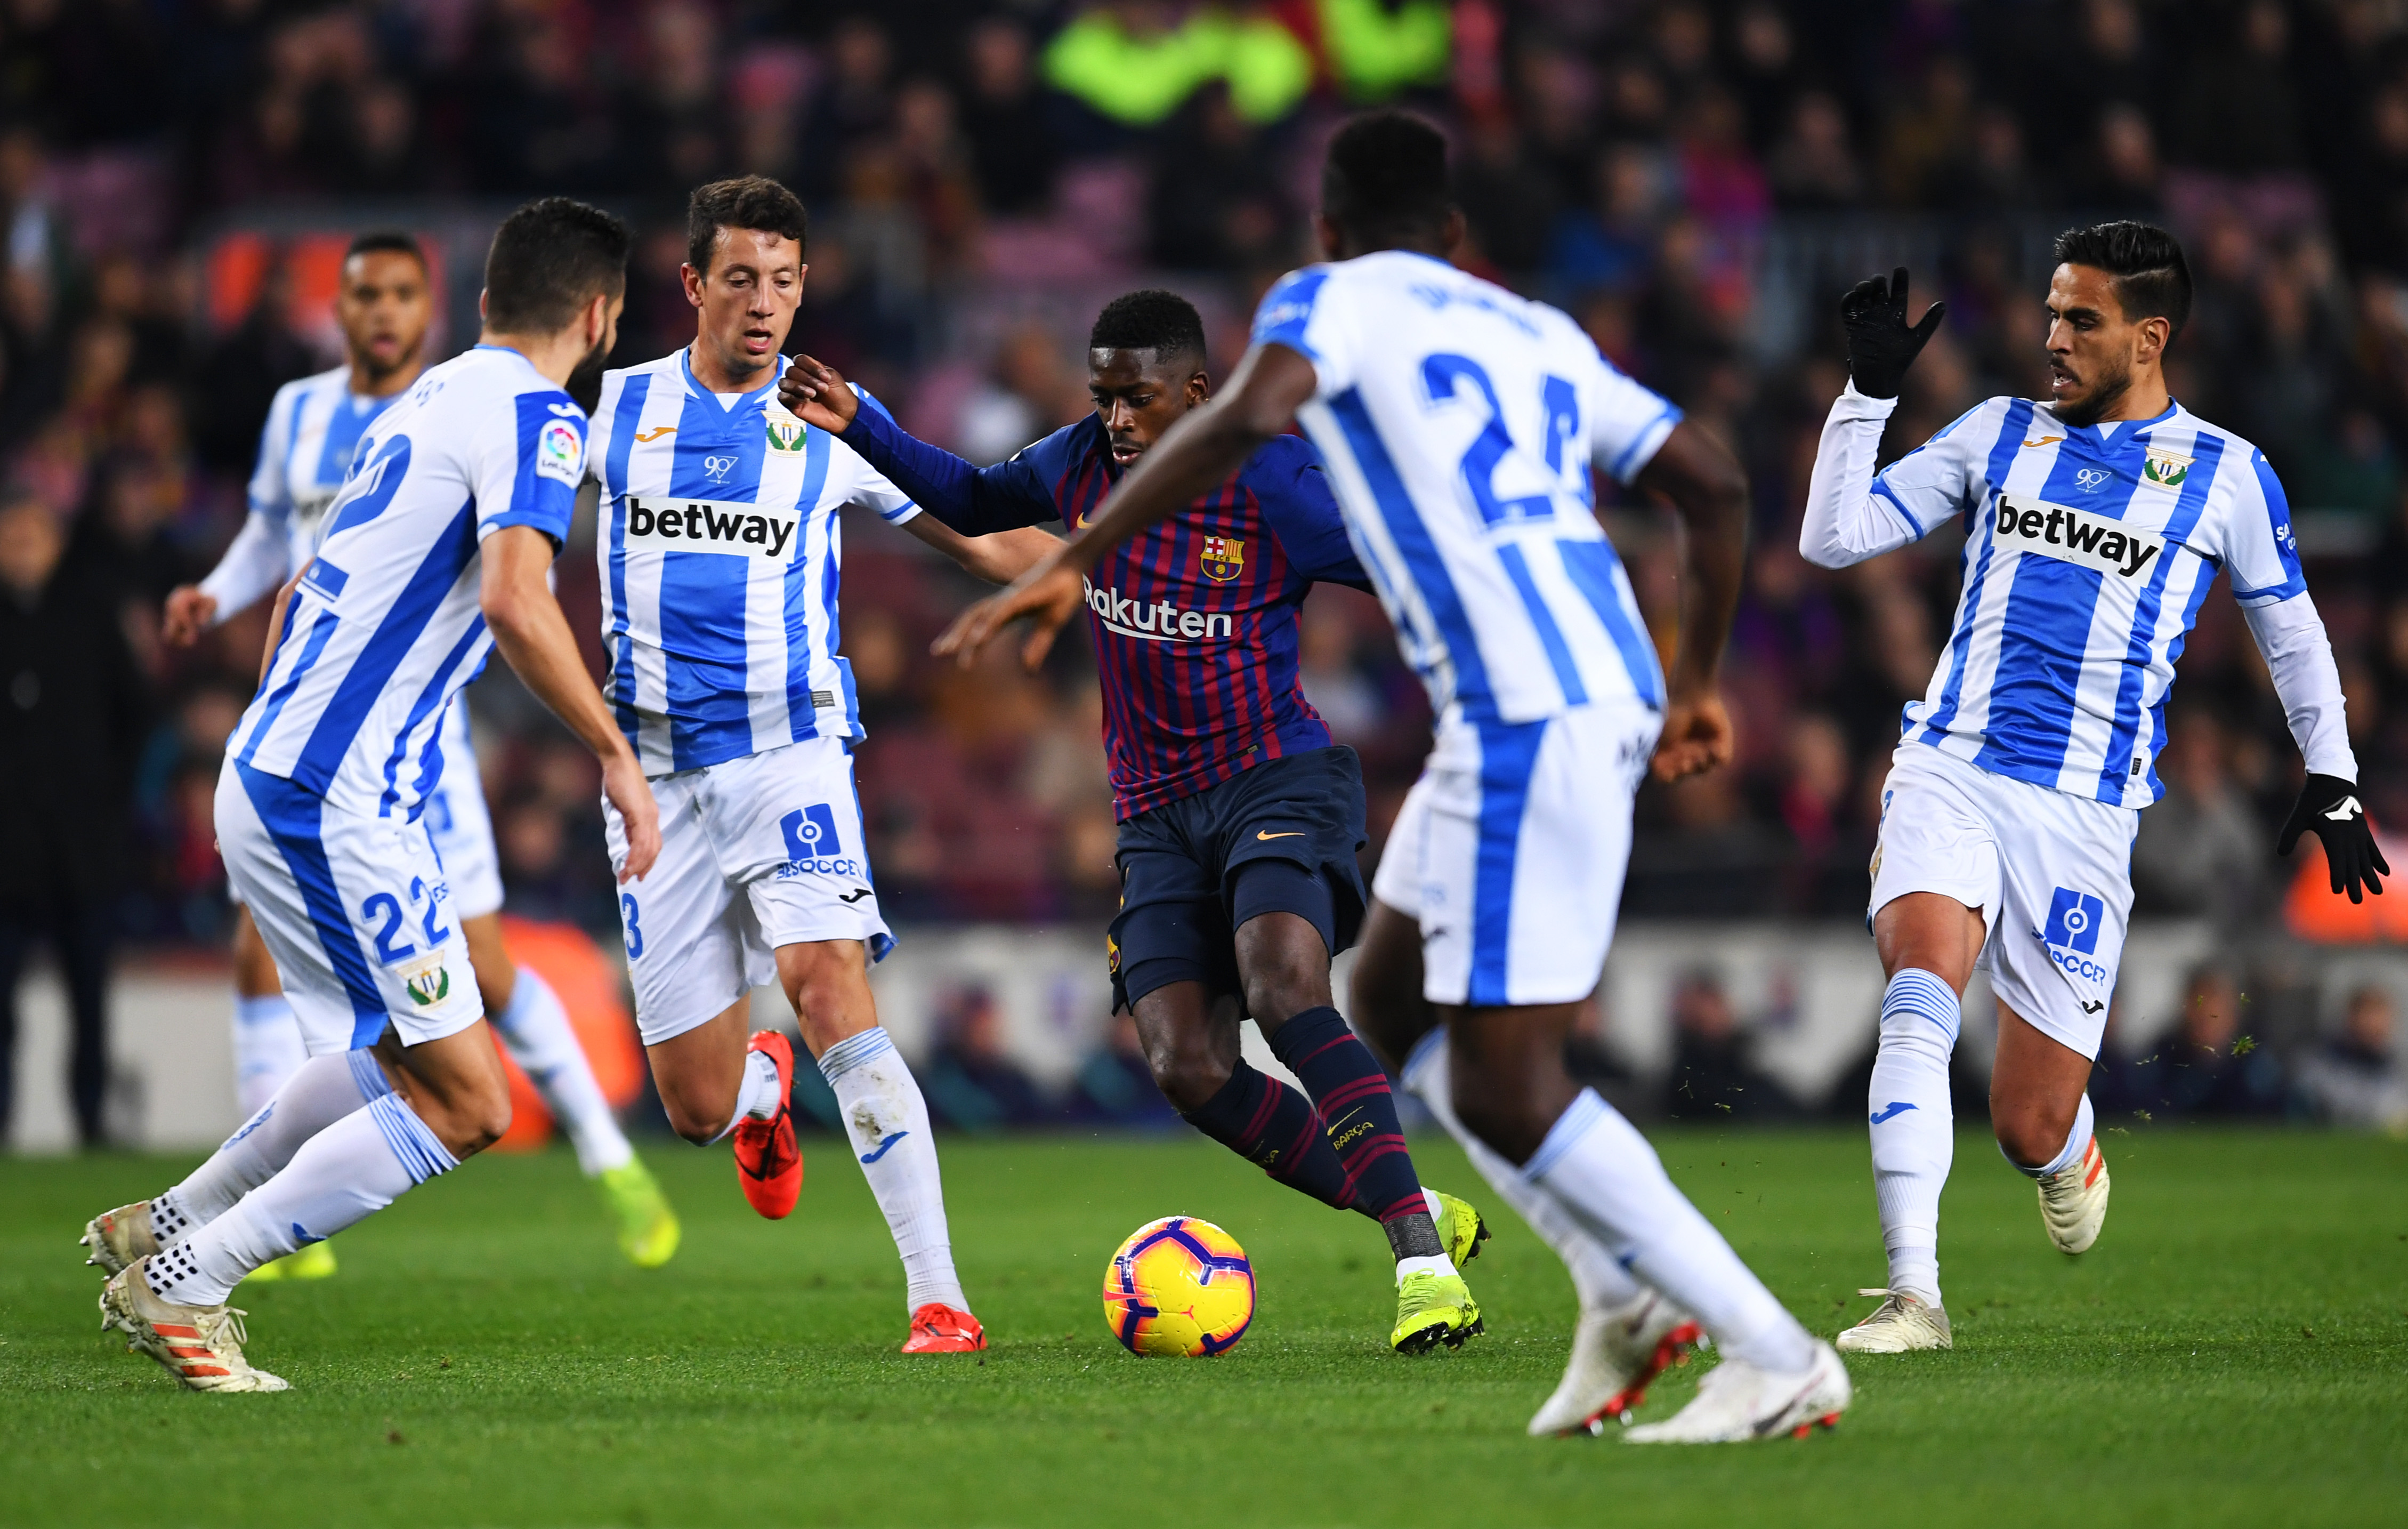 Ousmane Dembele vs Leganes Highlights: 21-Year-Old With 70 Minutes Of Glory4518 x 2868